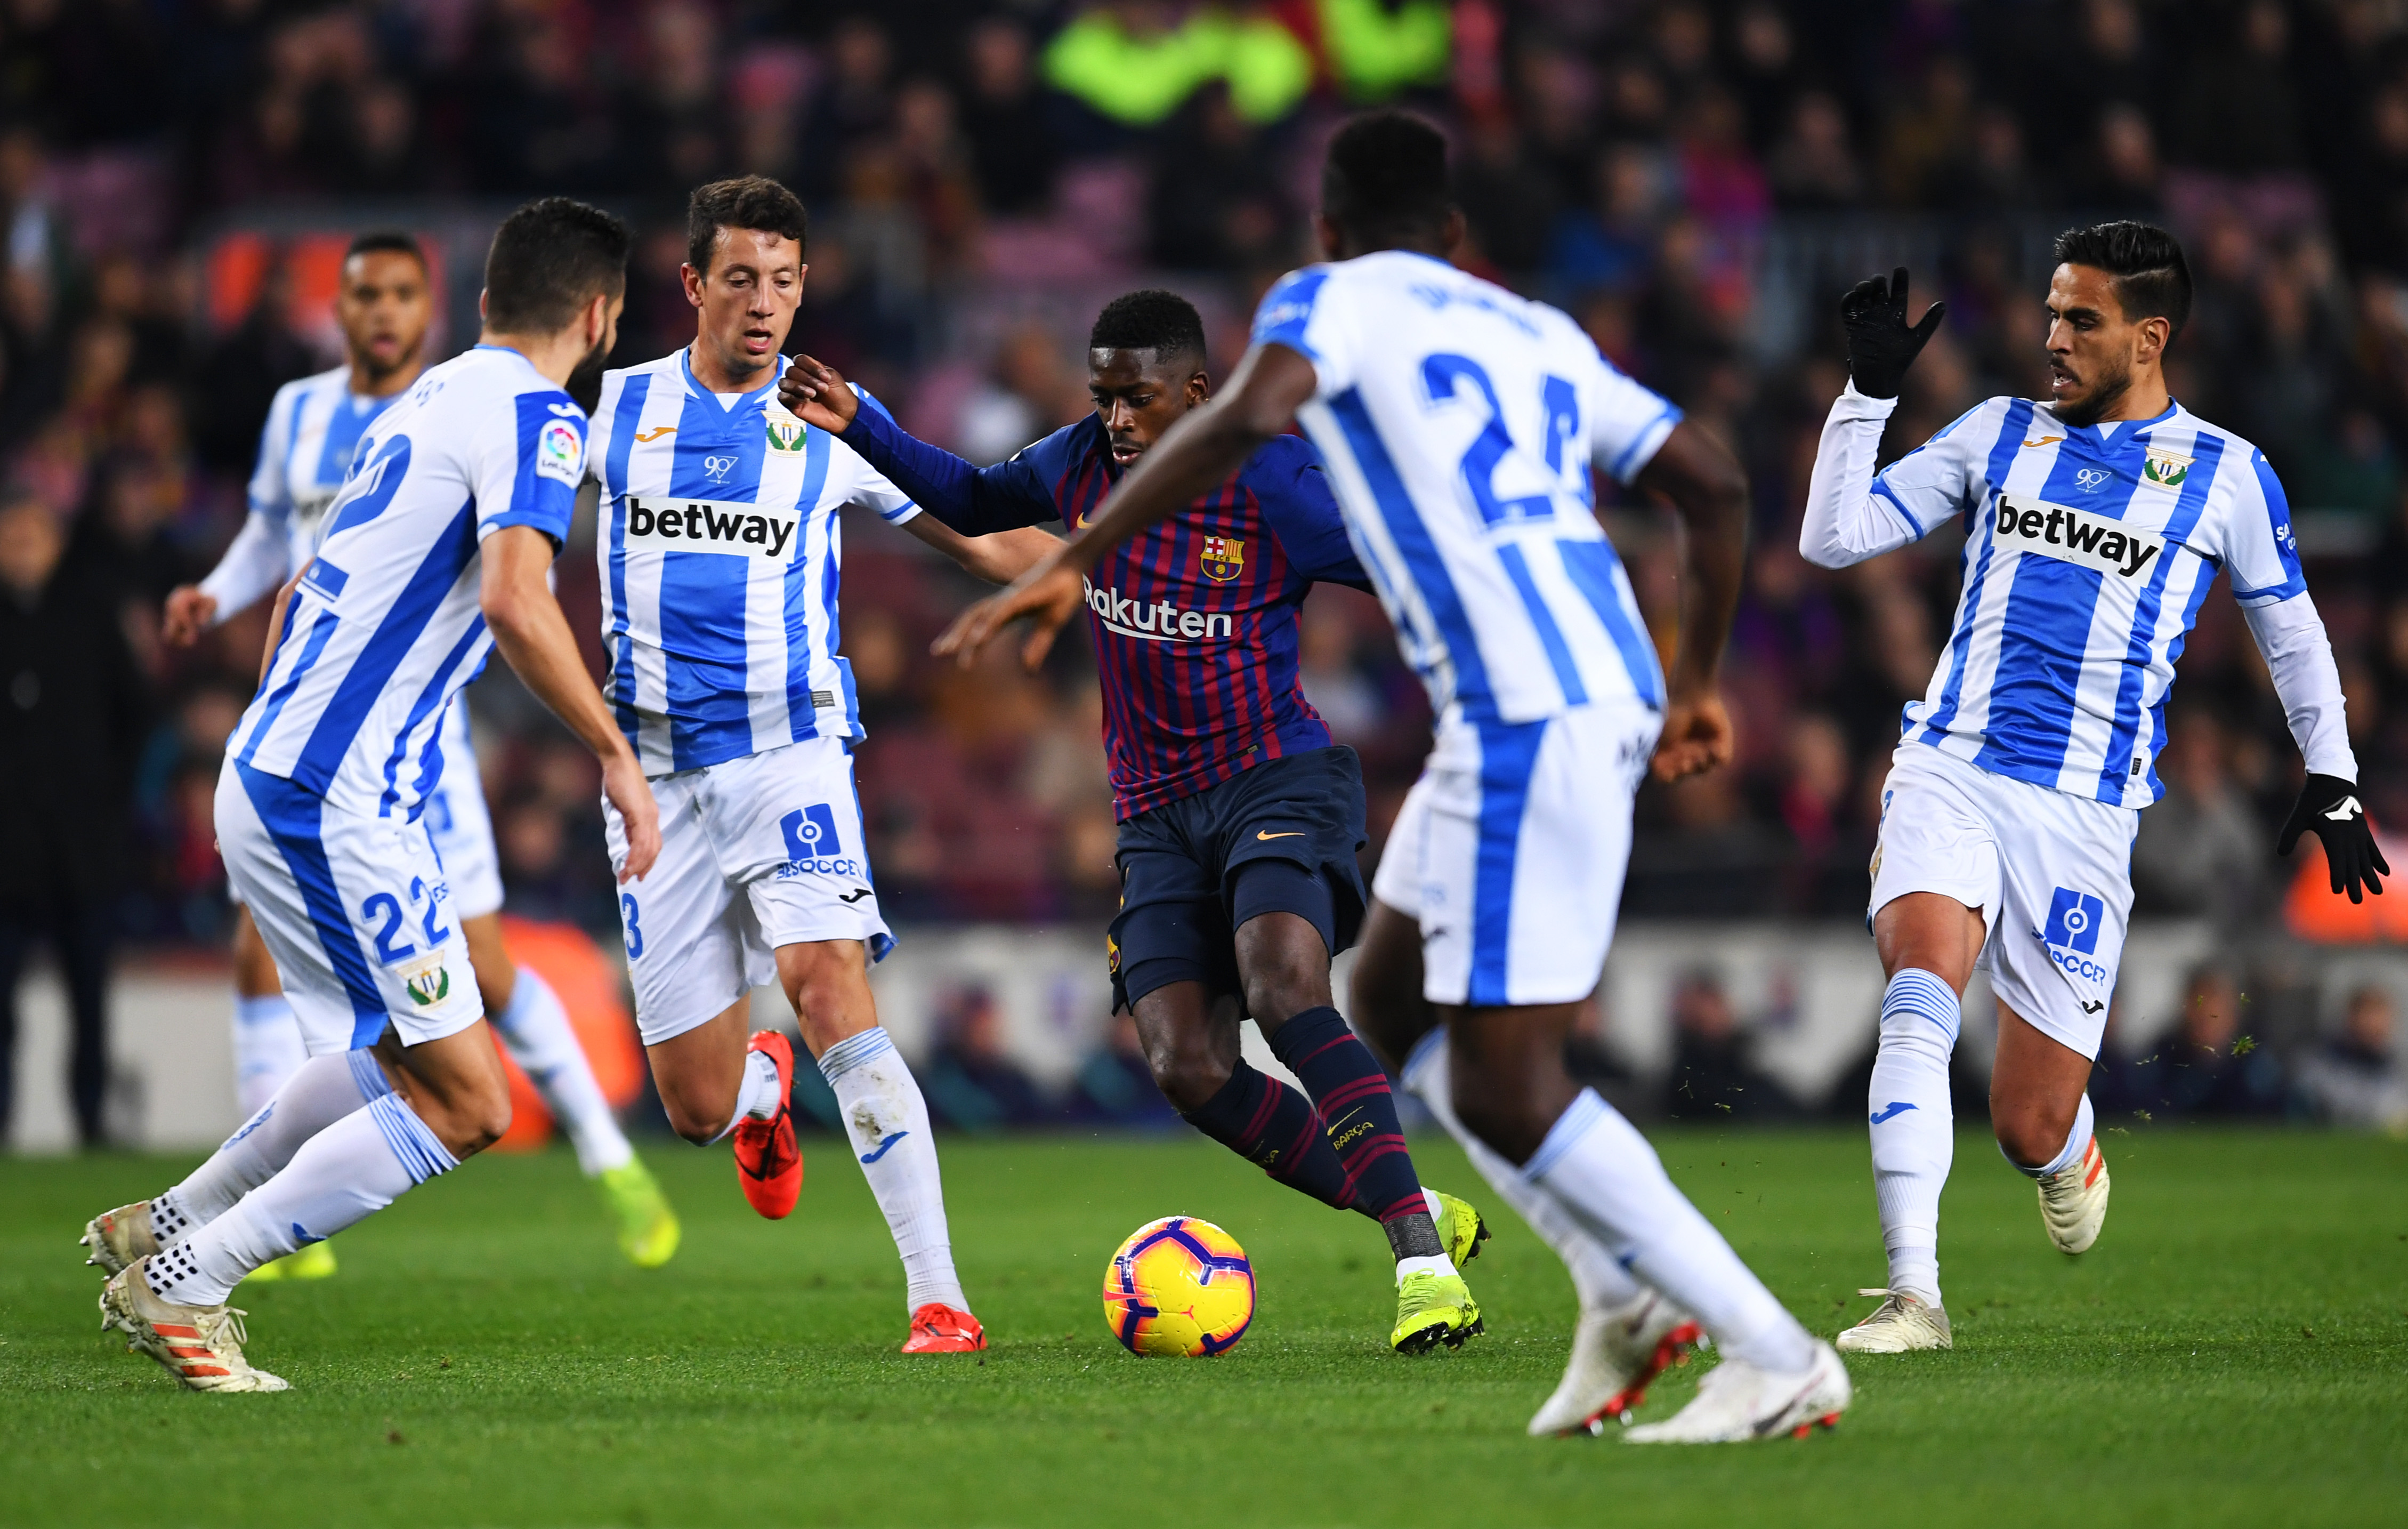 Ousmane Dembele vs Leganes Highlights: 21-Year-Old With 70 Minutes Of Glory4518 x 2868